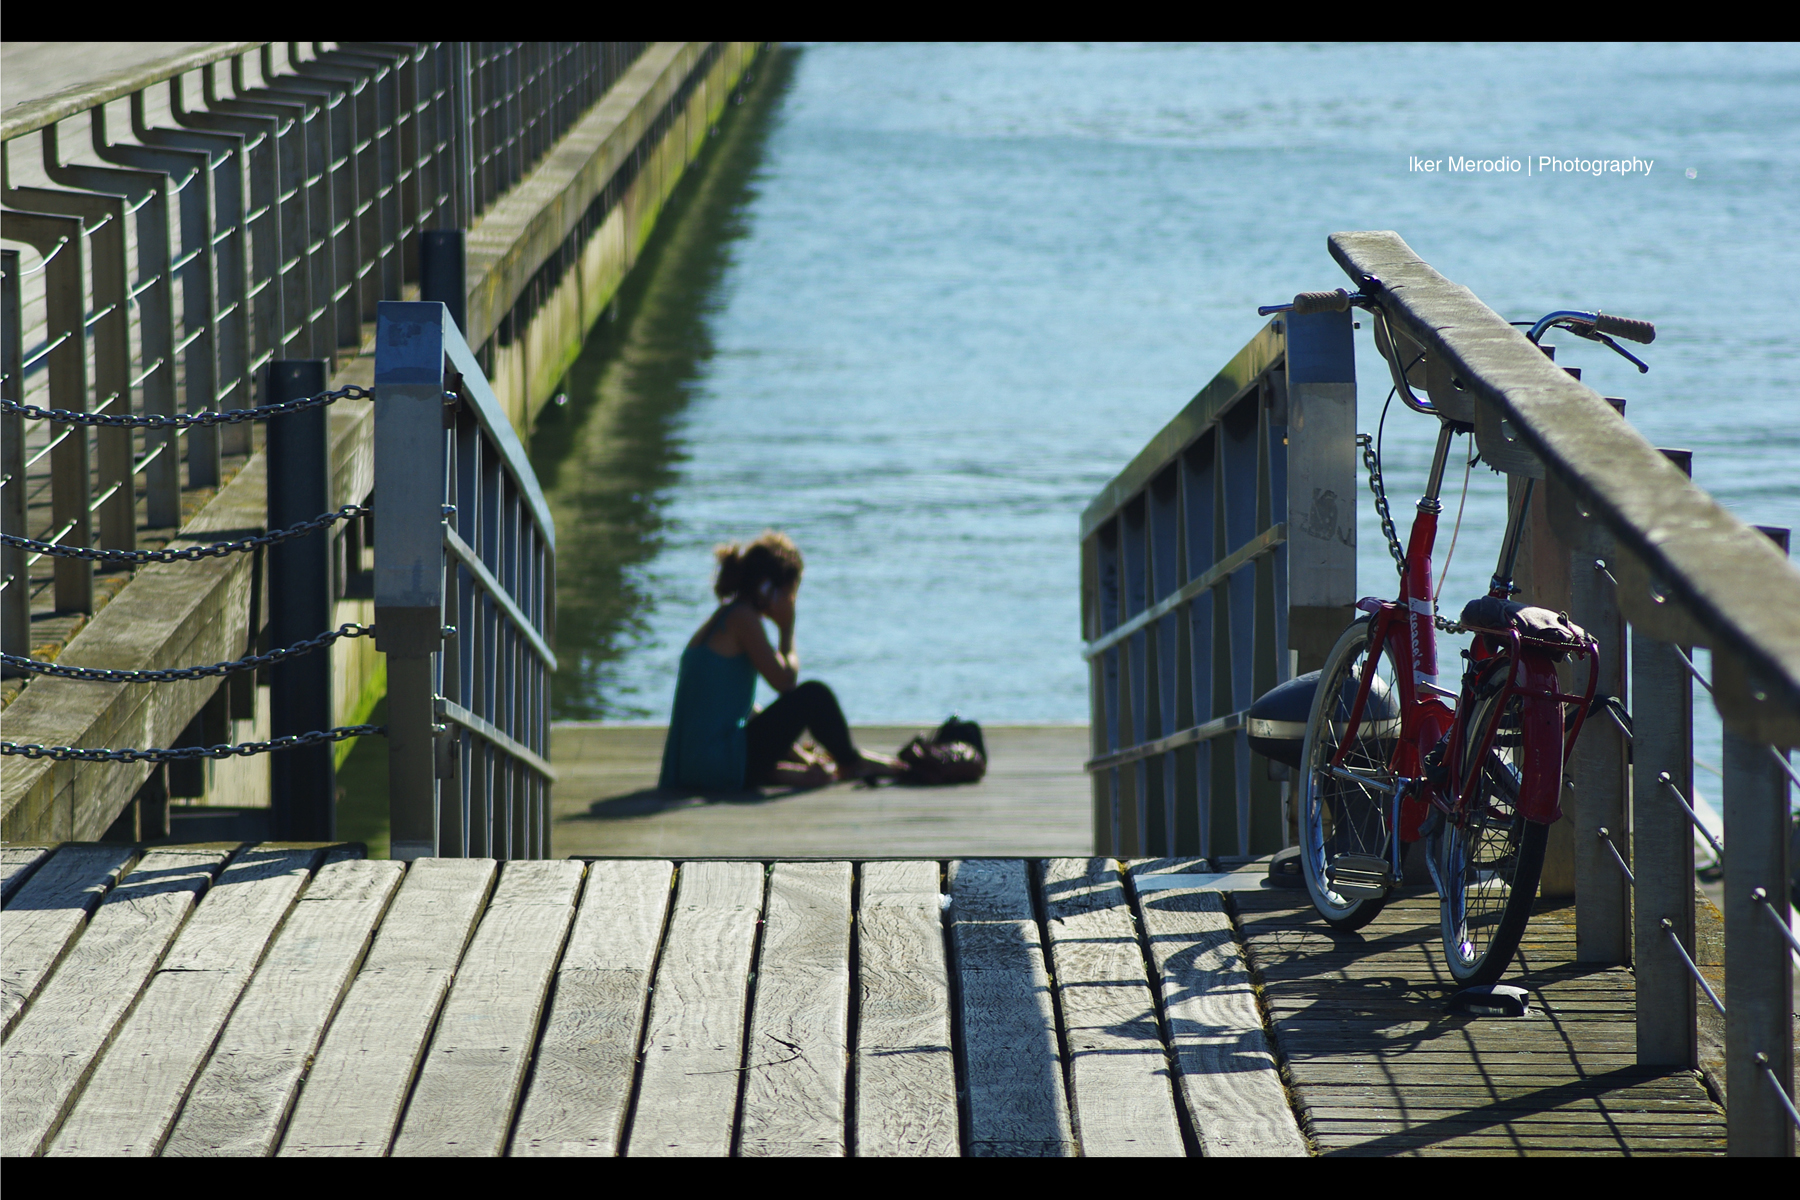 Red Bicycle and Girl in Quay